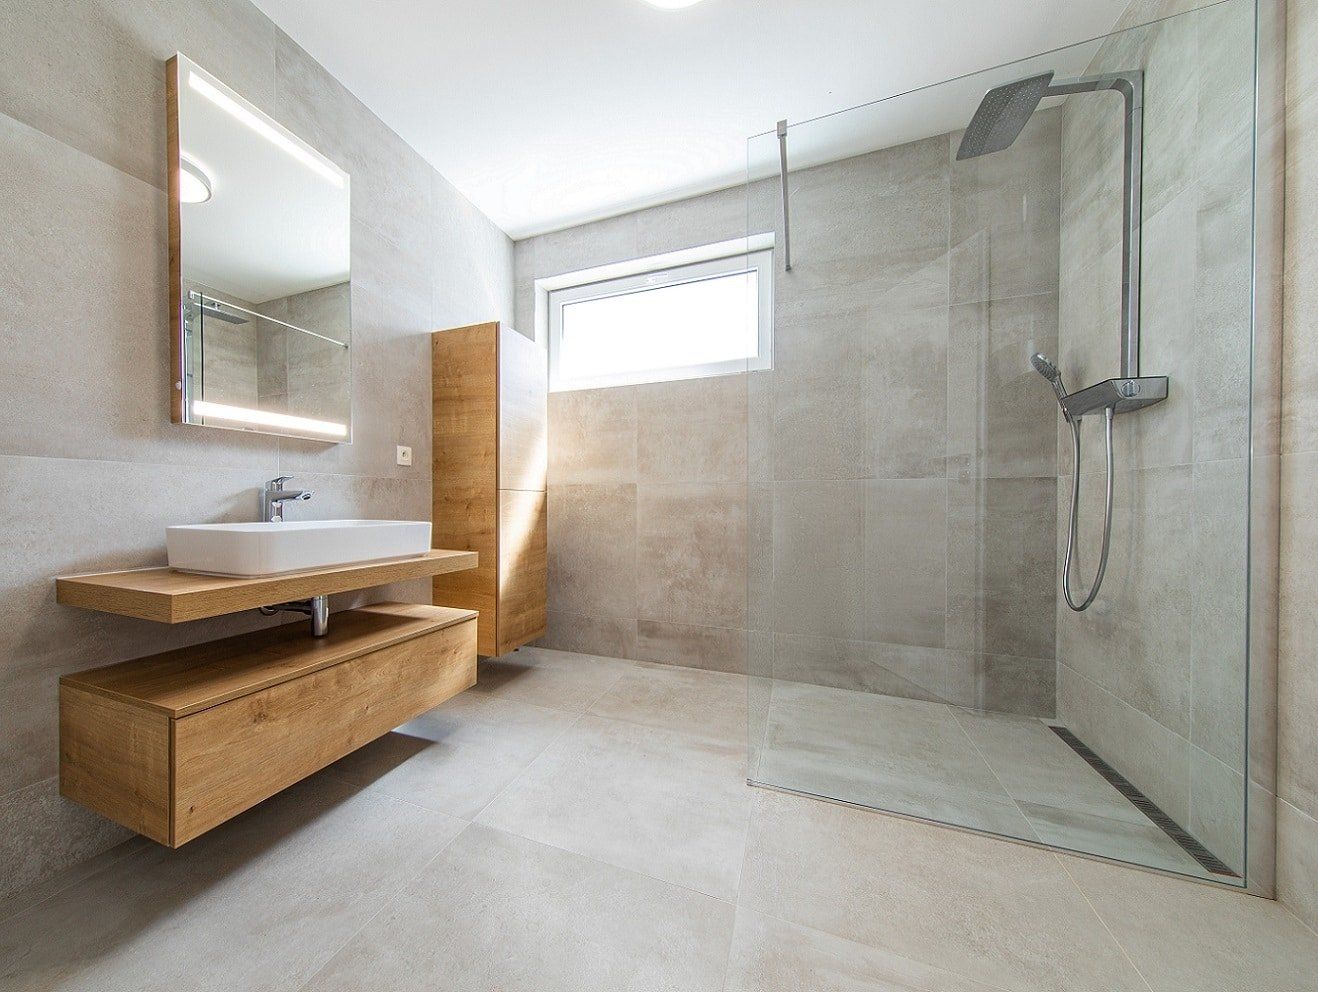 A classy looking remodelled bathroom in a residential apartment in Wollongong, NSW.